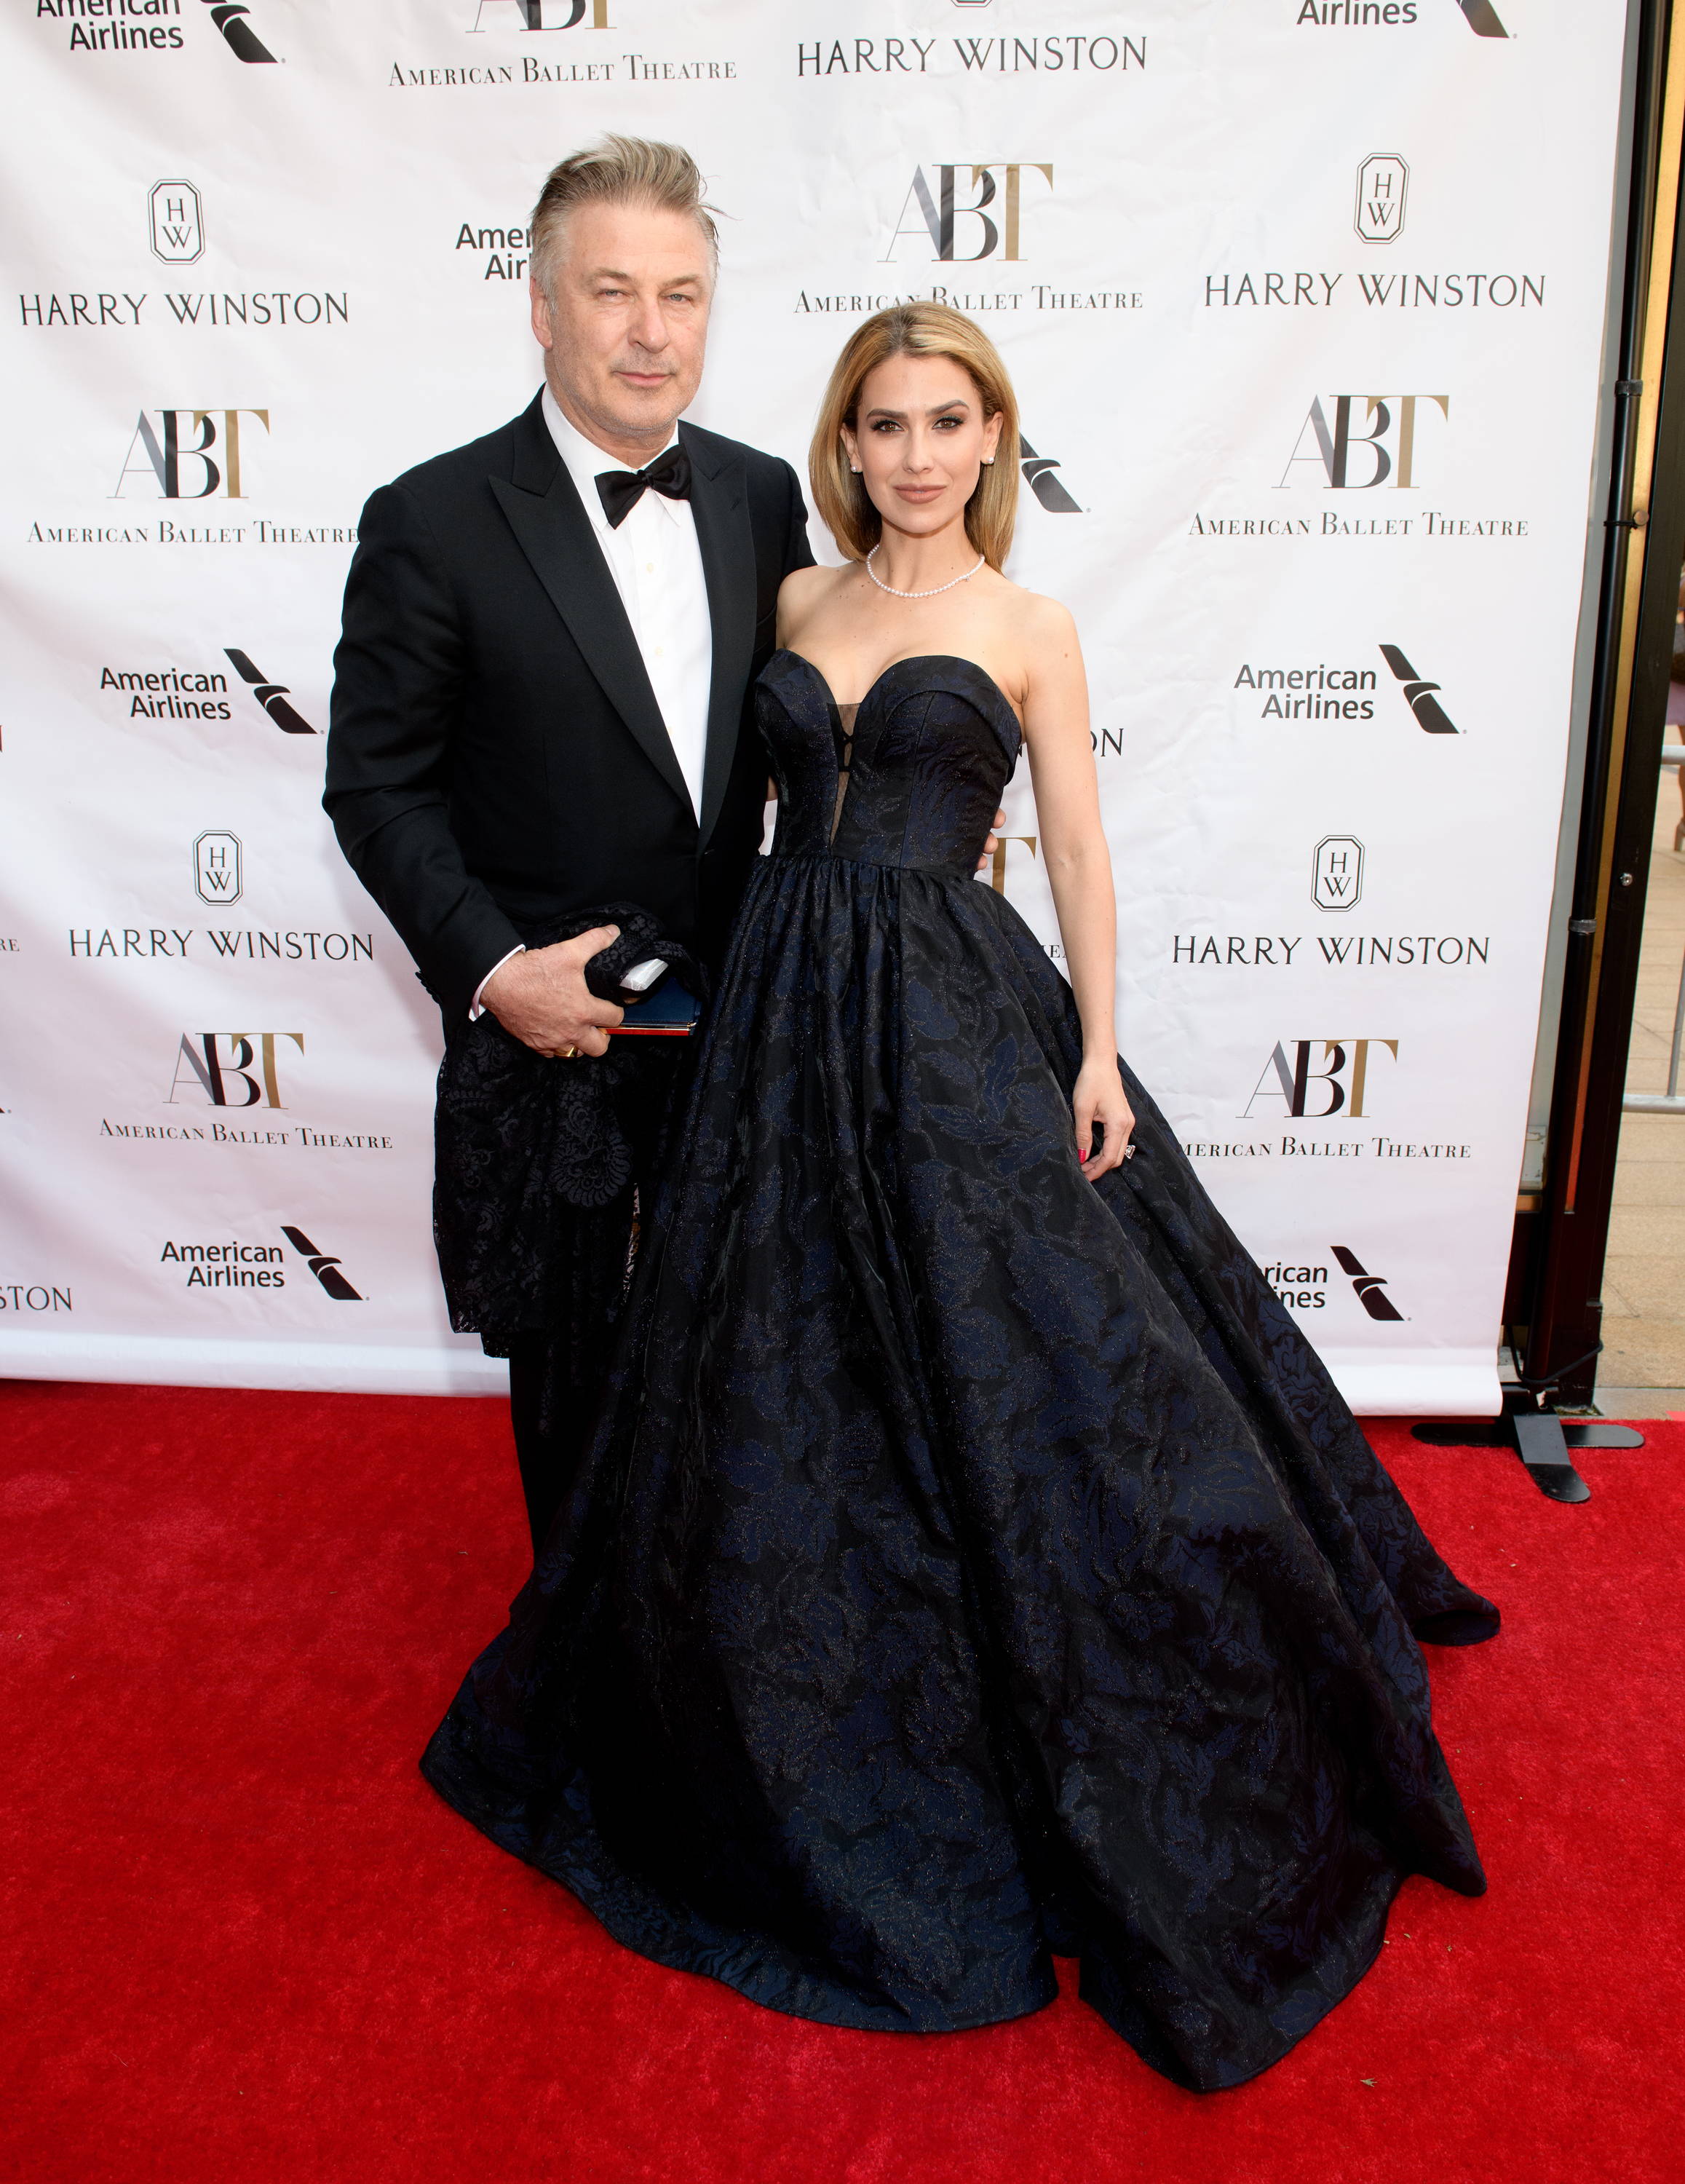 Hilaria Baldwin looked beautiful in Badgley Mischka Couture at the American Ballet Theatre Spring Gala in NYC on May 20, 2019.